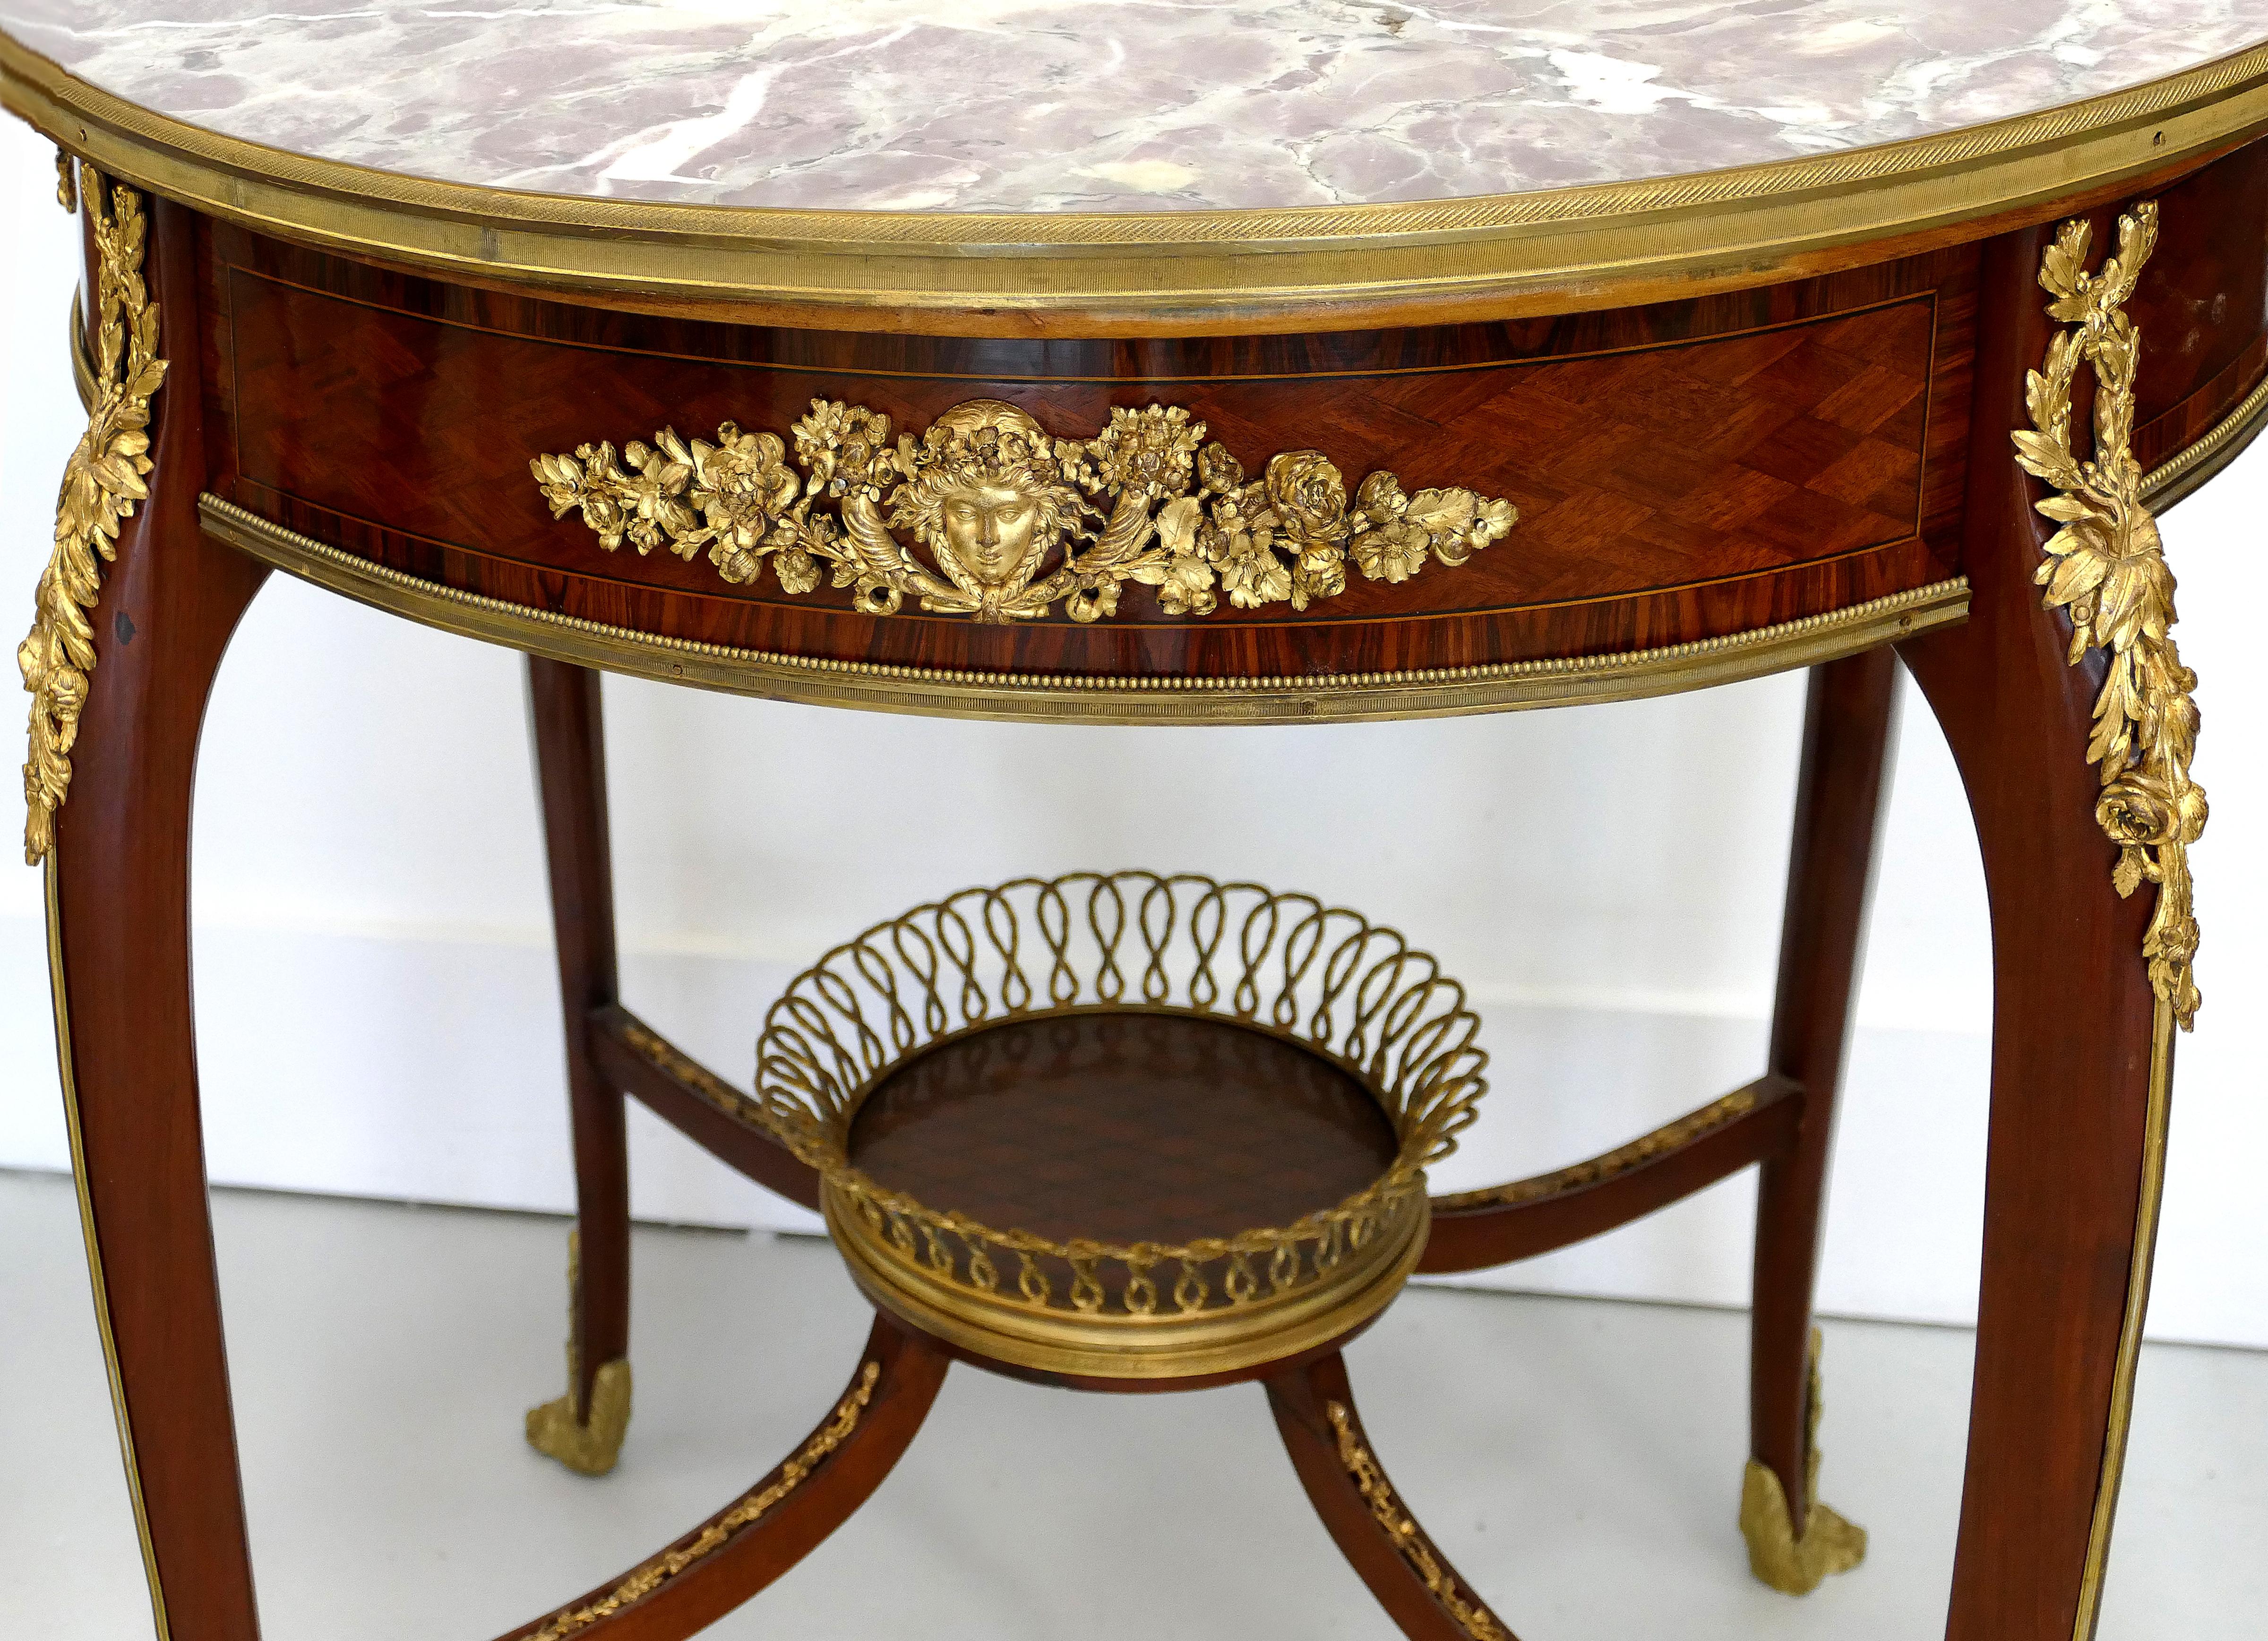 French Francois Linke Center Table with Bronze Basket and Mounts, France, circa 1880